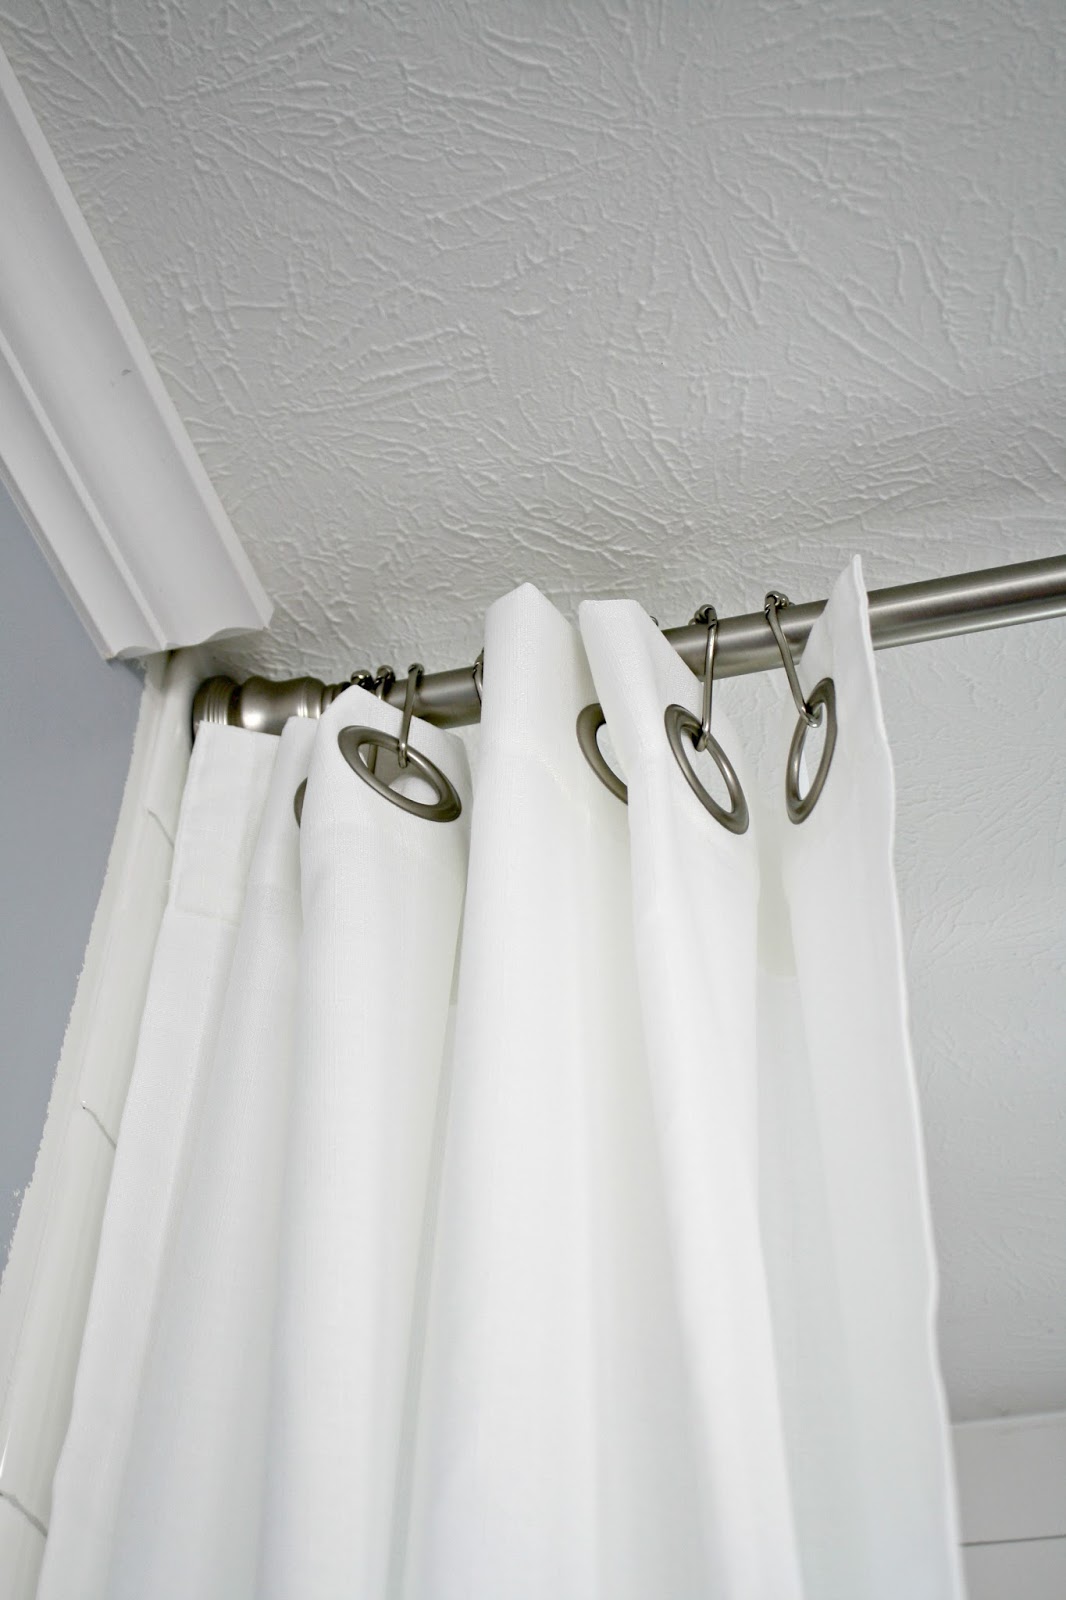 How To Hang Double Shower Curtains For, Can You Use A Shower Rod For Curtains